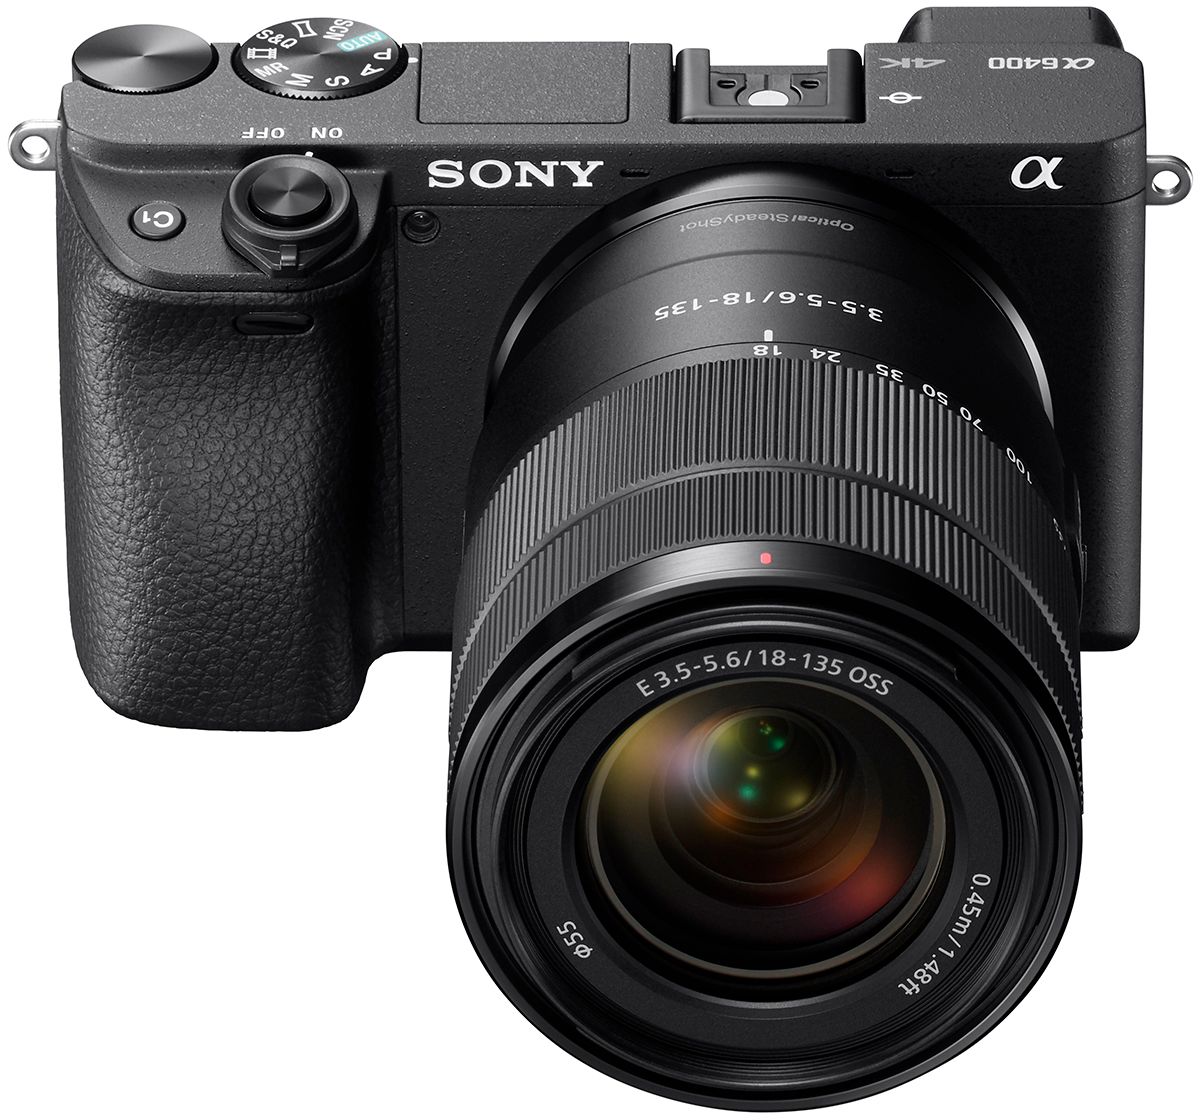 Sony Alpha a6400 Mirrorless 4K Video Camera with E 18-135mm f/3.5 